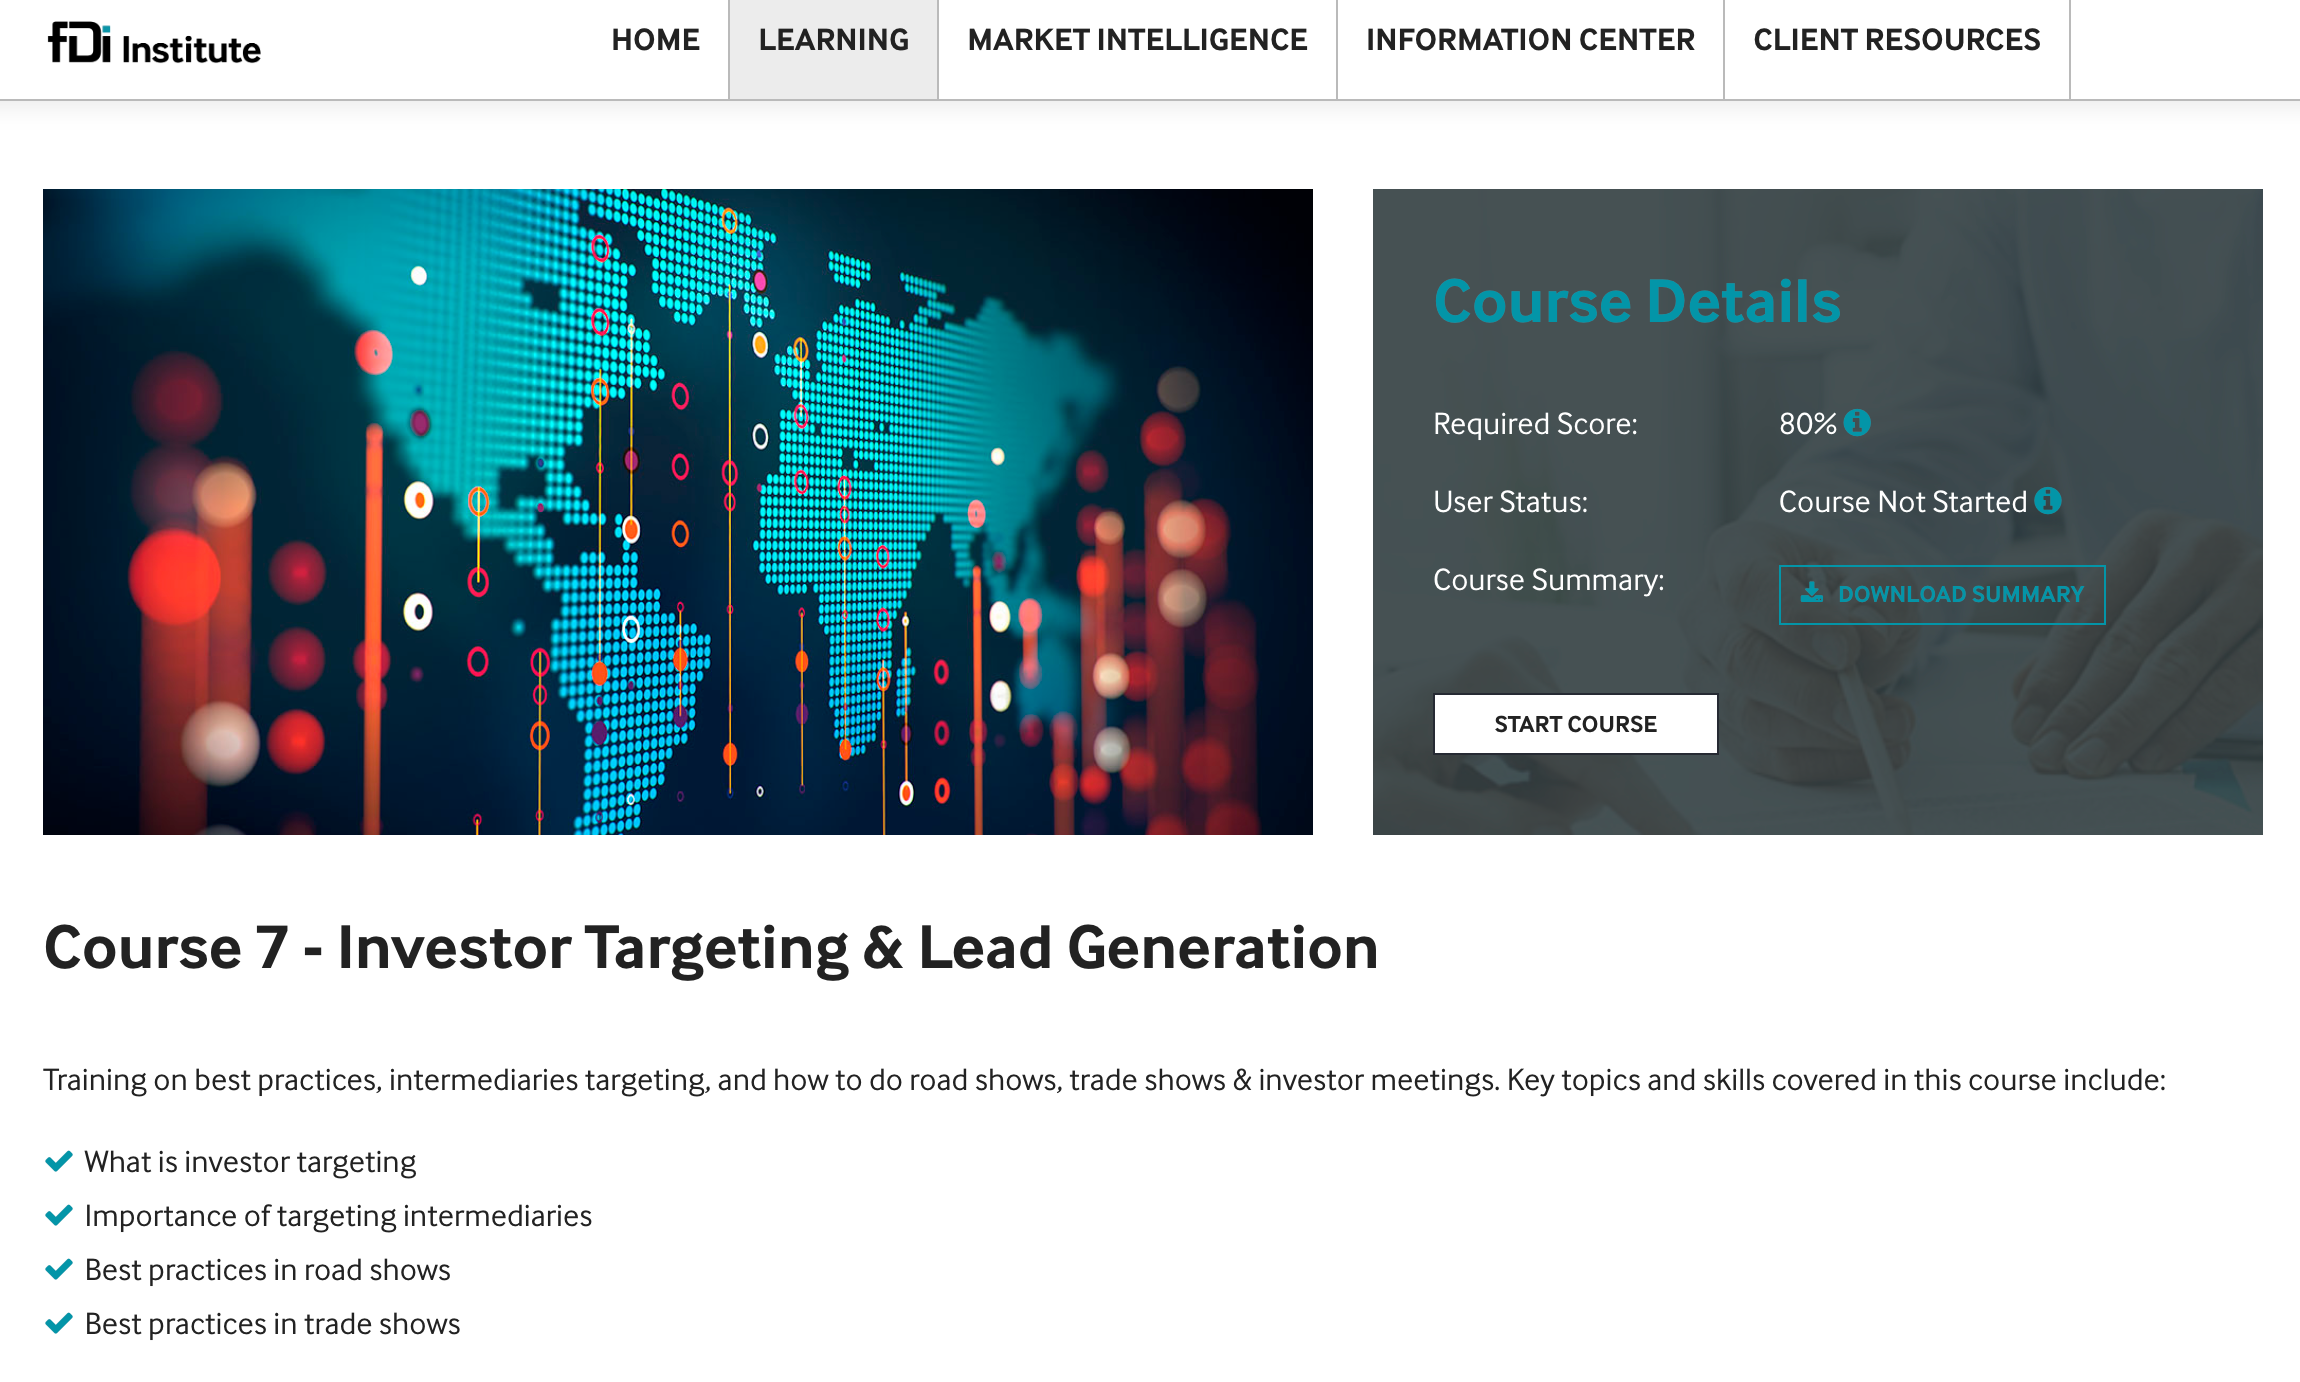 fDi Institute e-learning platform investor targeting and lead generation